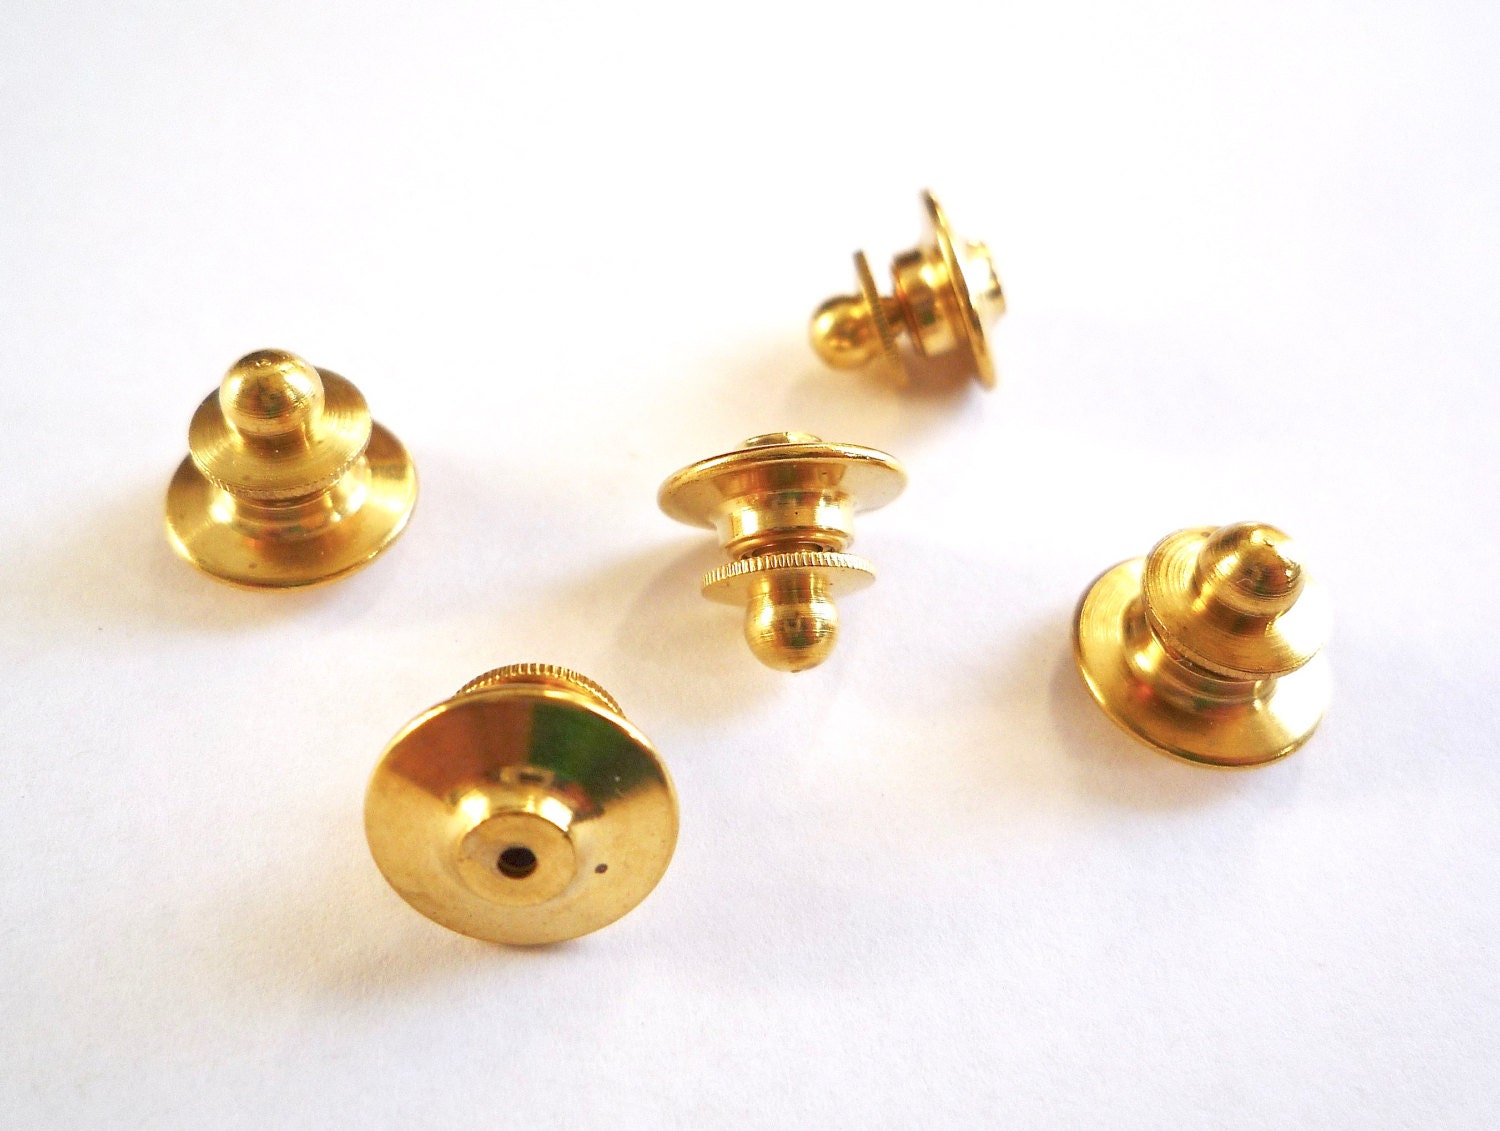 6pc Secure Enamel Pin Locking Back Clutch Deluxe Flat Top Gold color Brass  Lock Pin Backs Clutches Spare Enamel Pin Backs